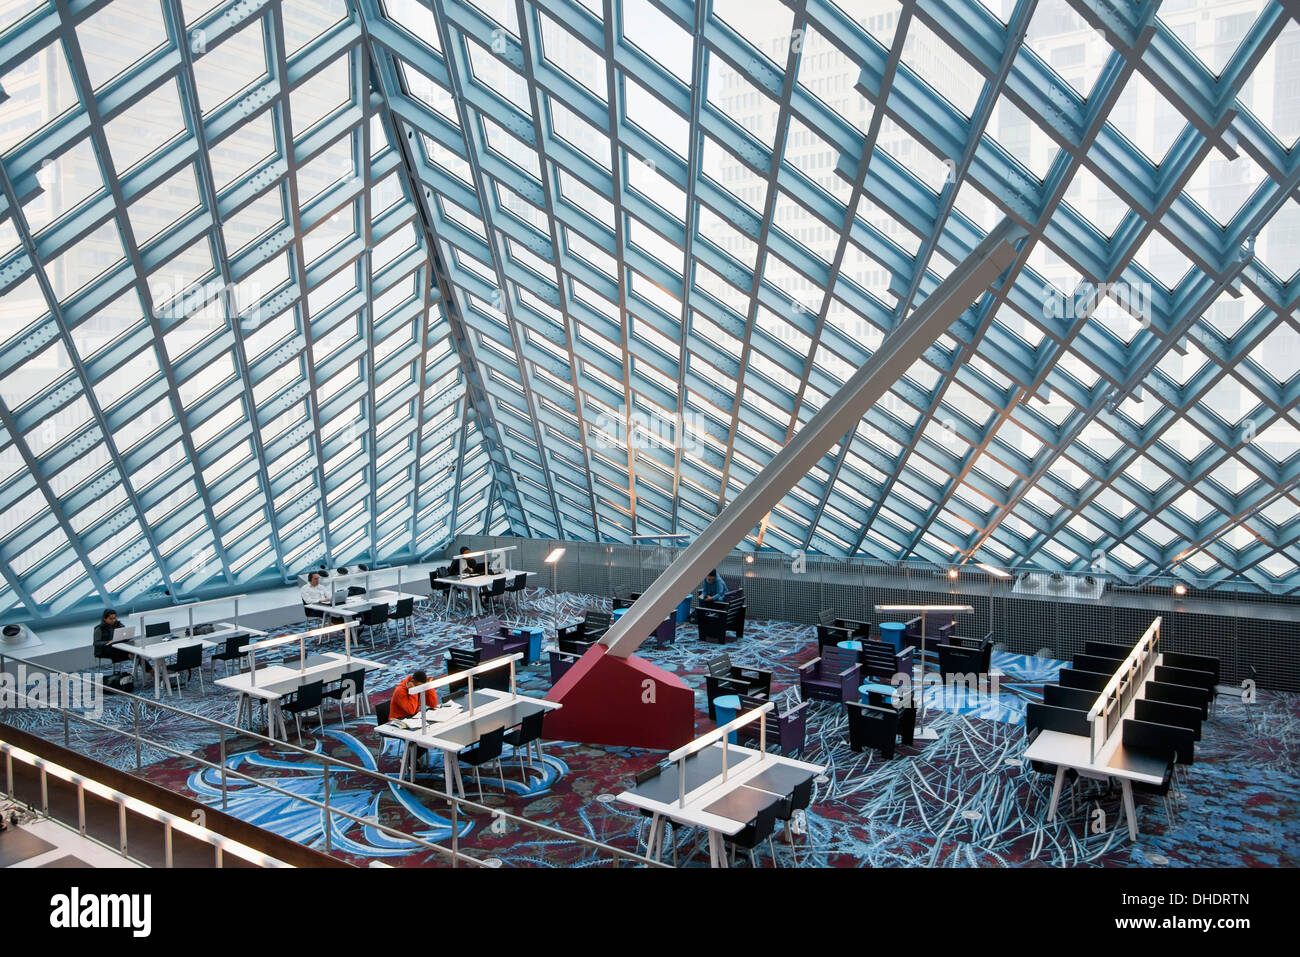 Top Floor Of Seattle Central Library With Sloped Glass Roof; Seattle, Washington, United States Of America Stock Photo